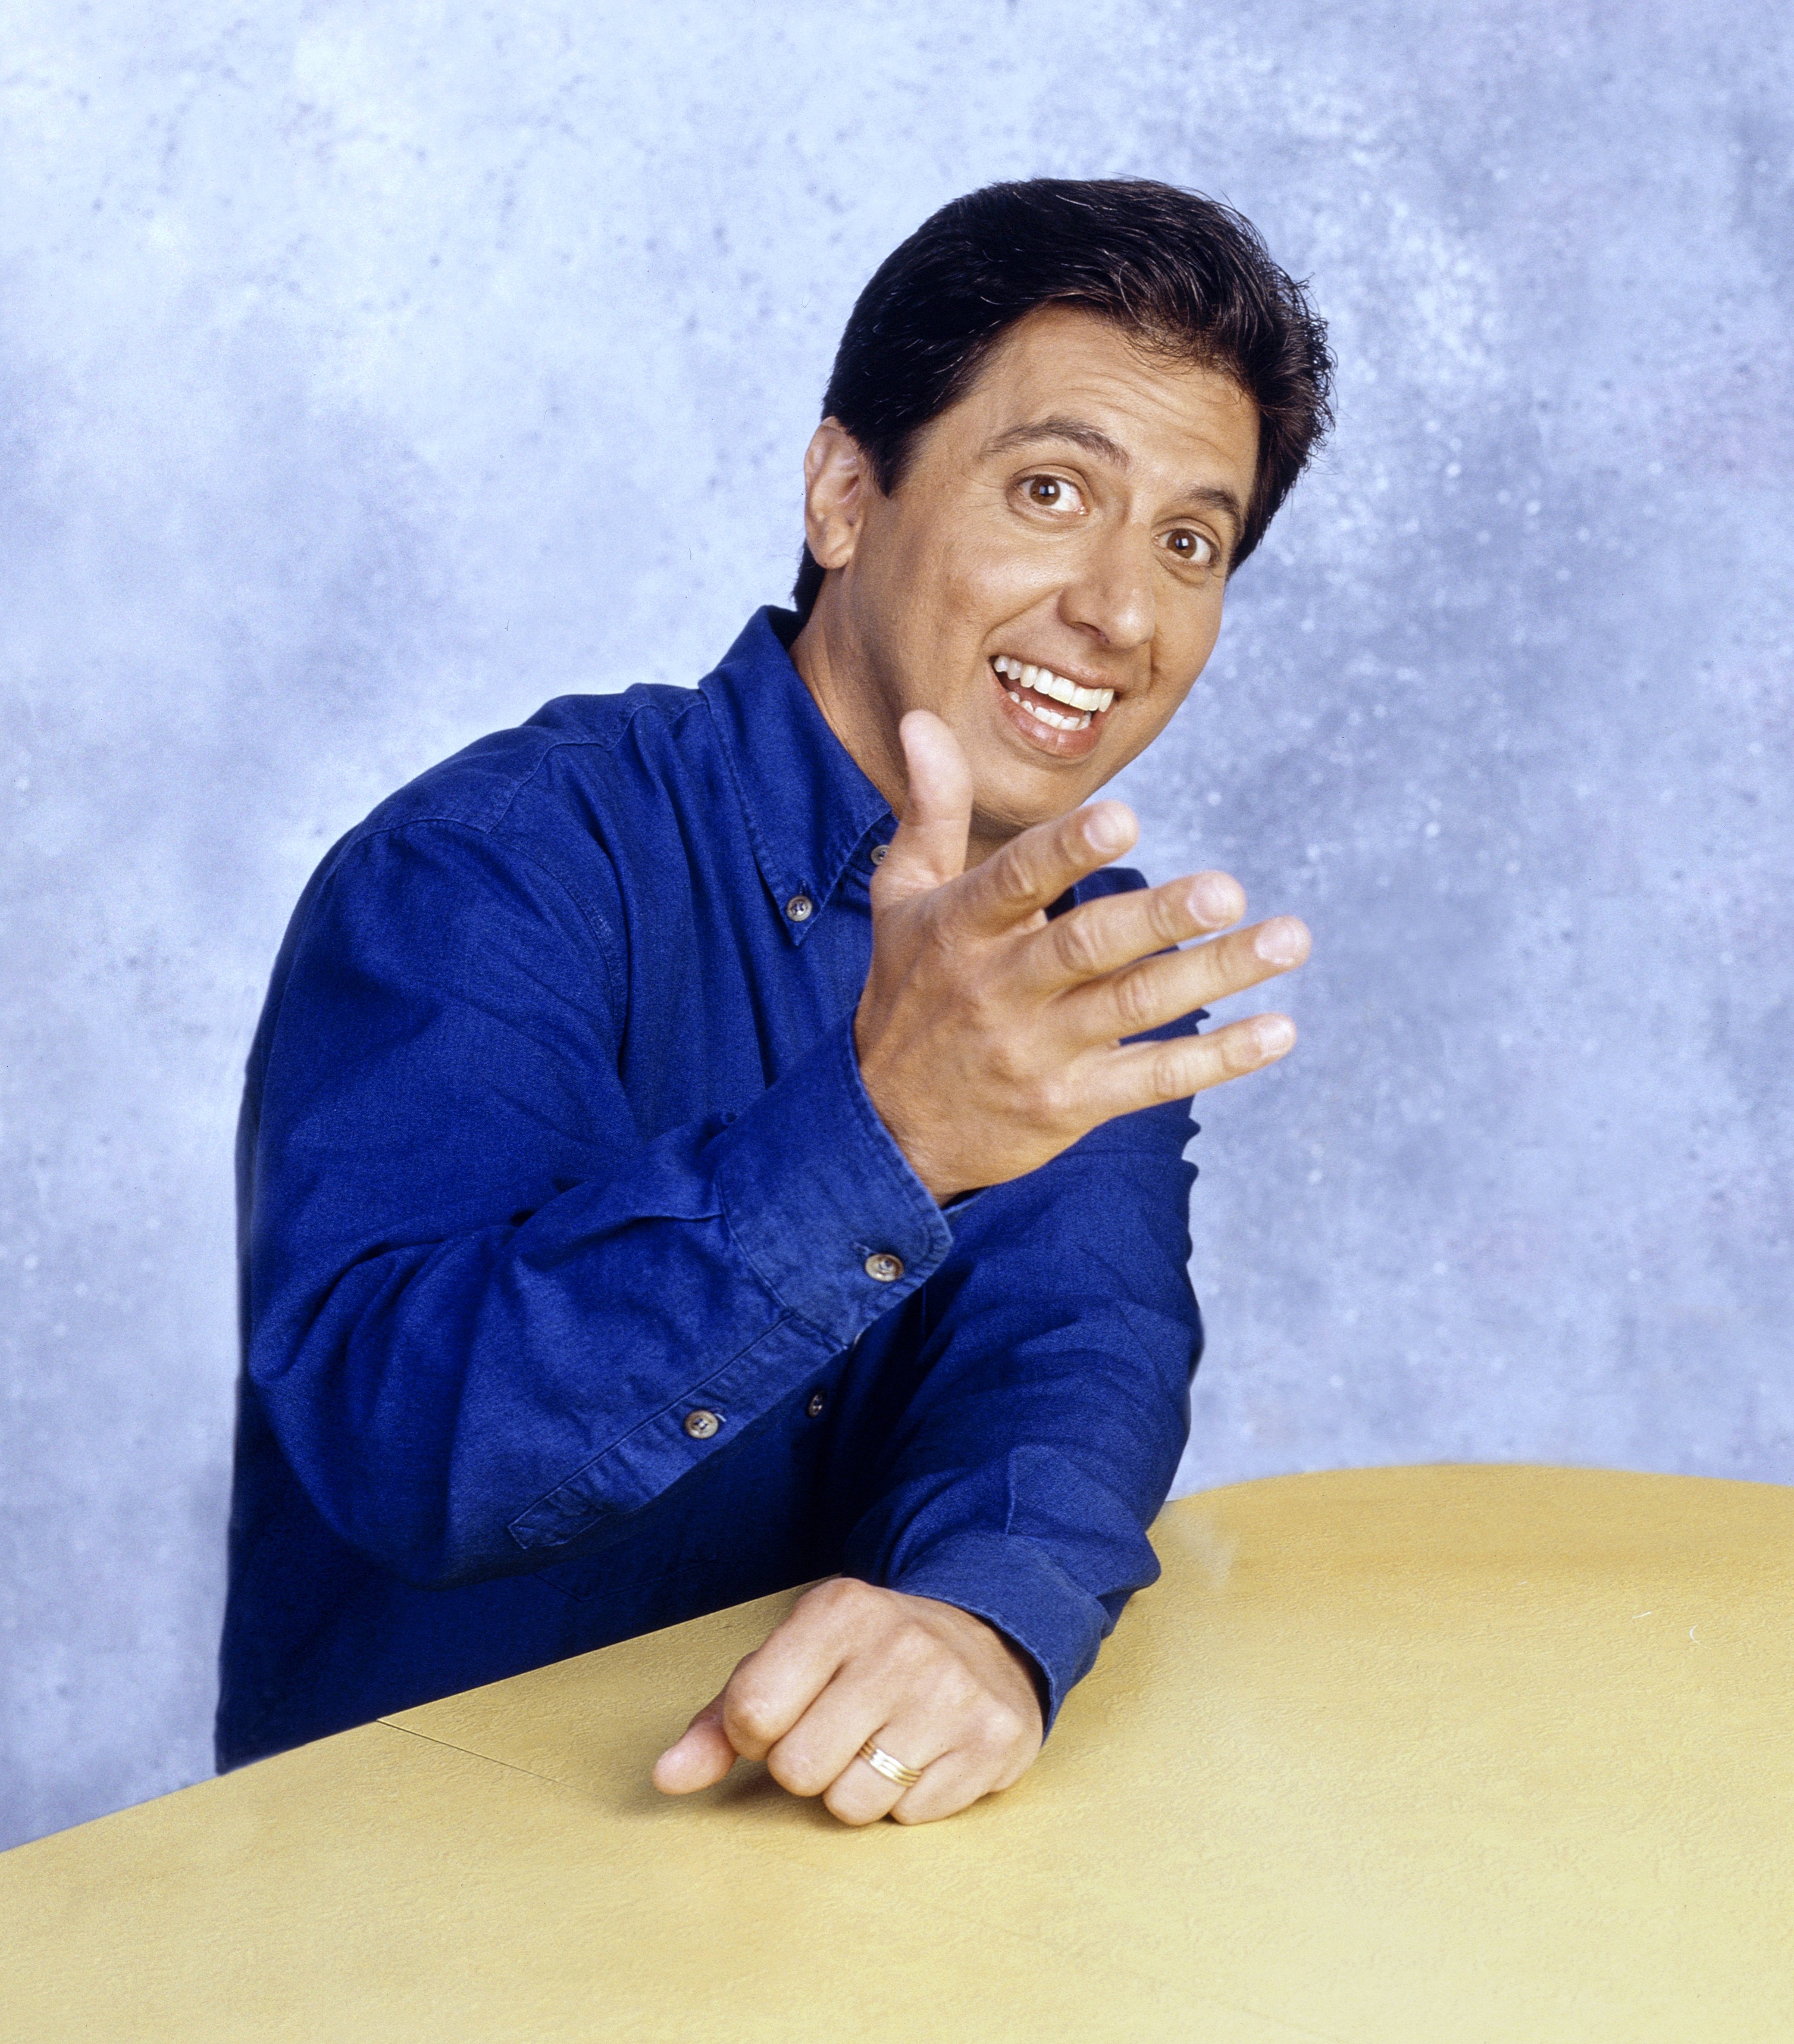 Ray Romano as Ray Barone during for the premiere episode of "Everybody Loves Raymond"on September 13, 1996 | Source: Getty Images